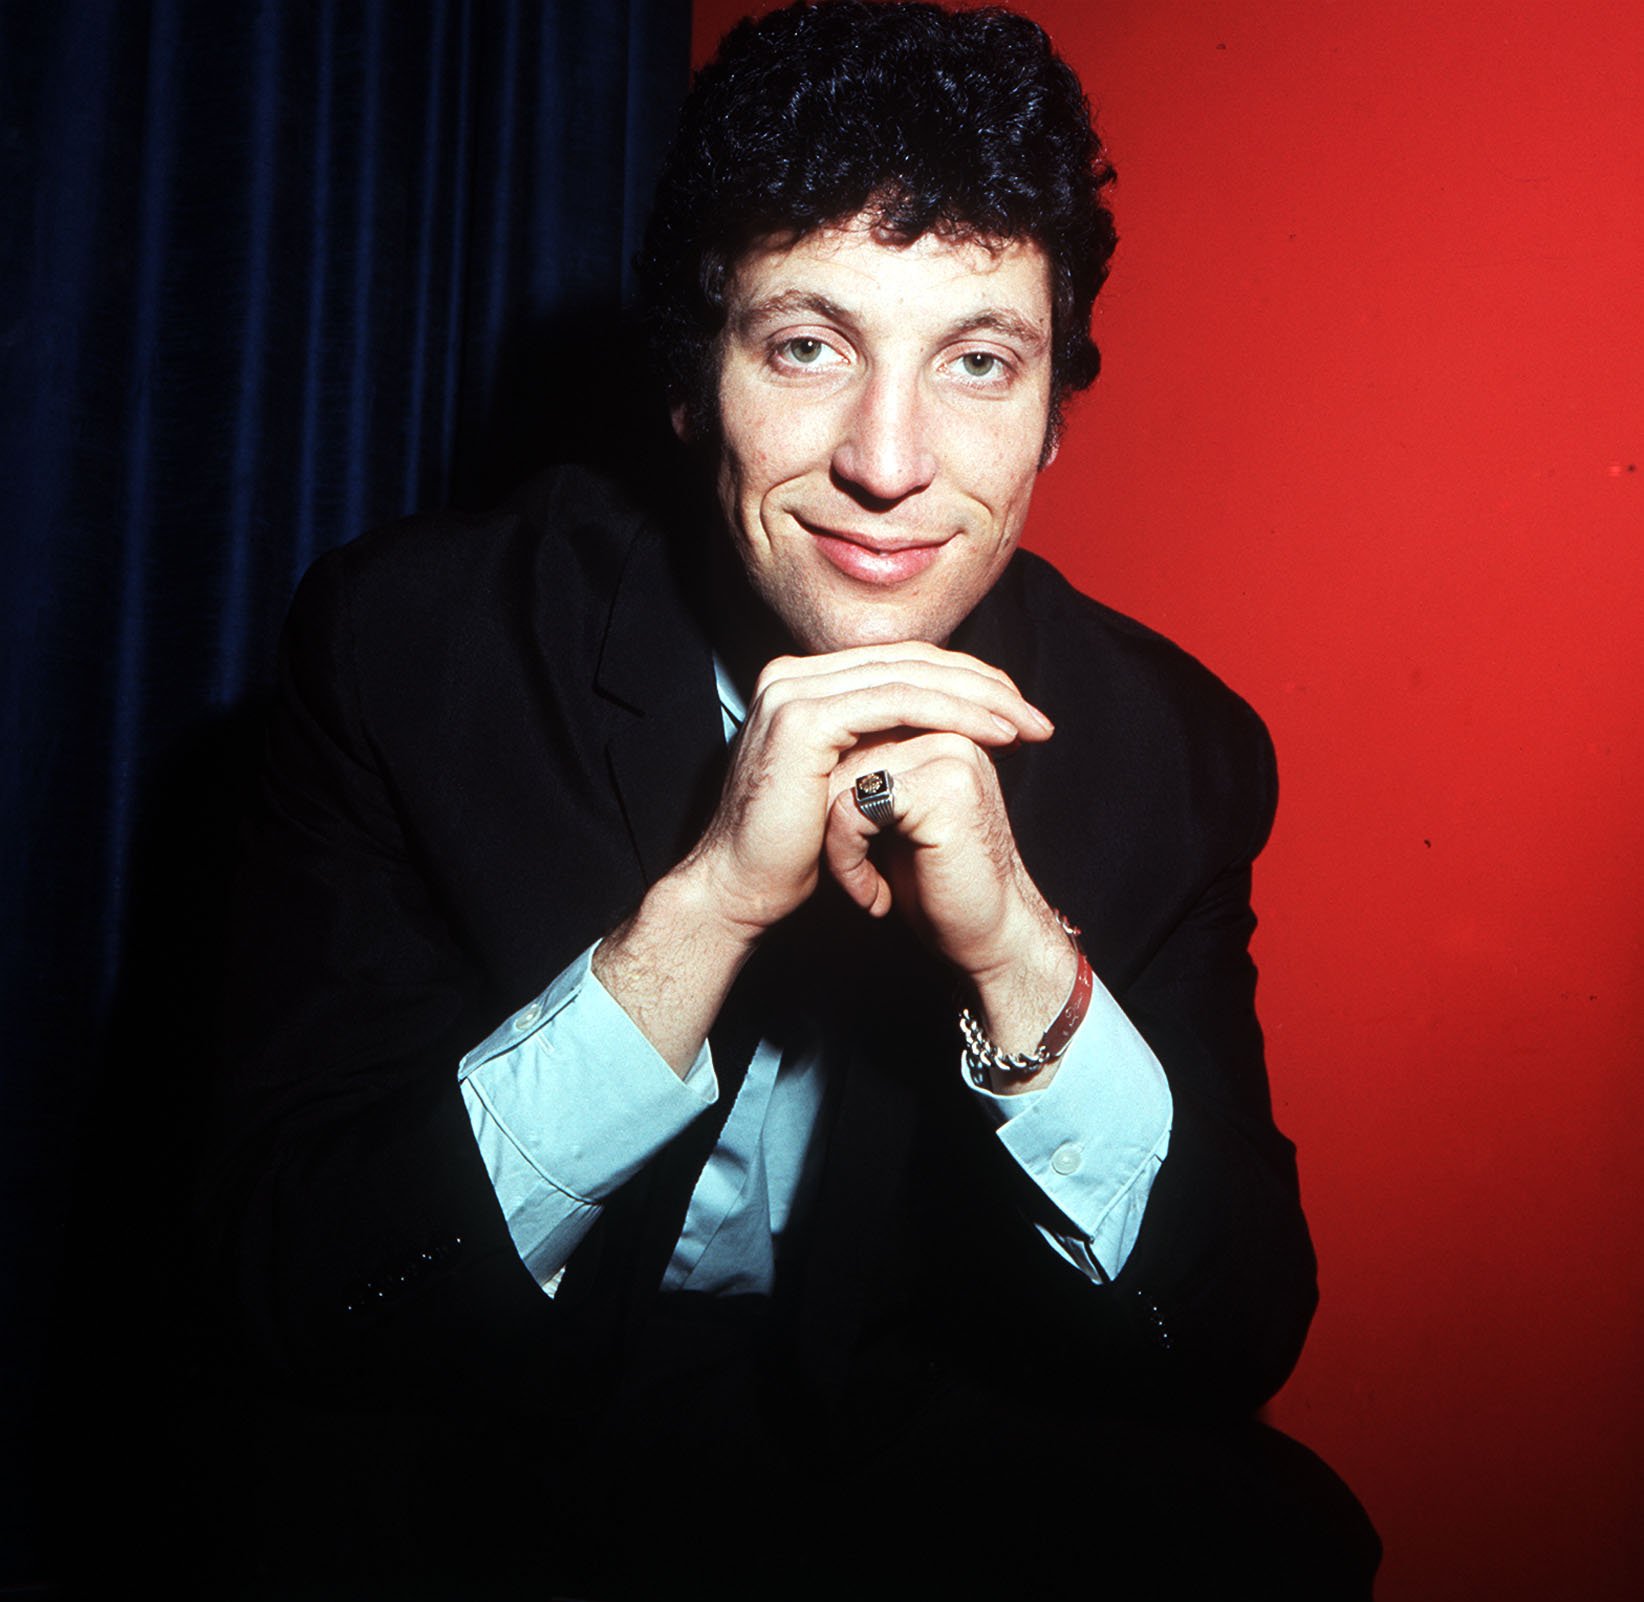 Tom Jones with a red background